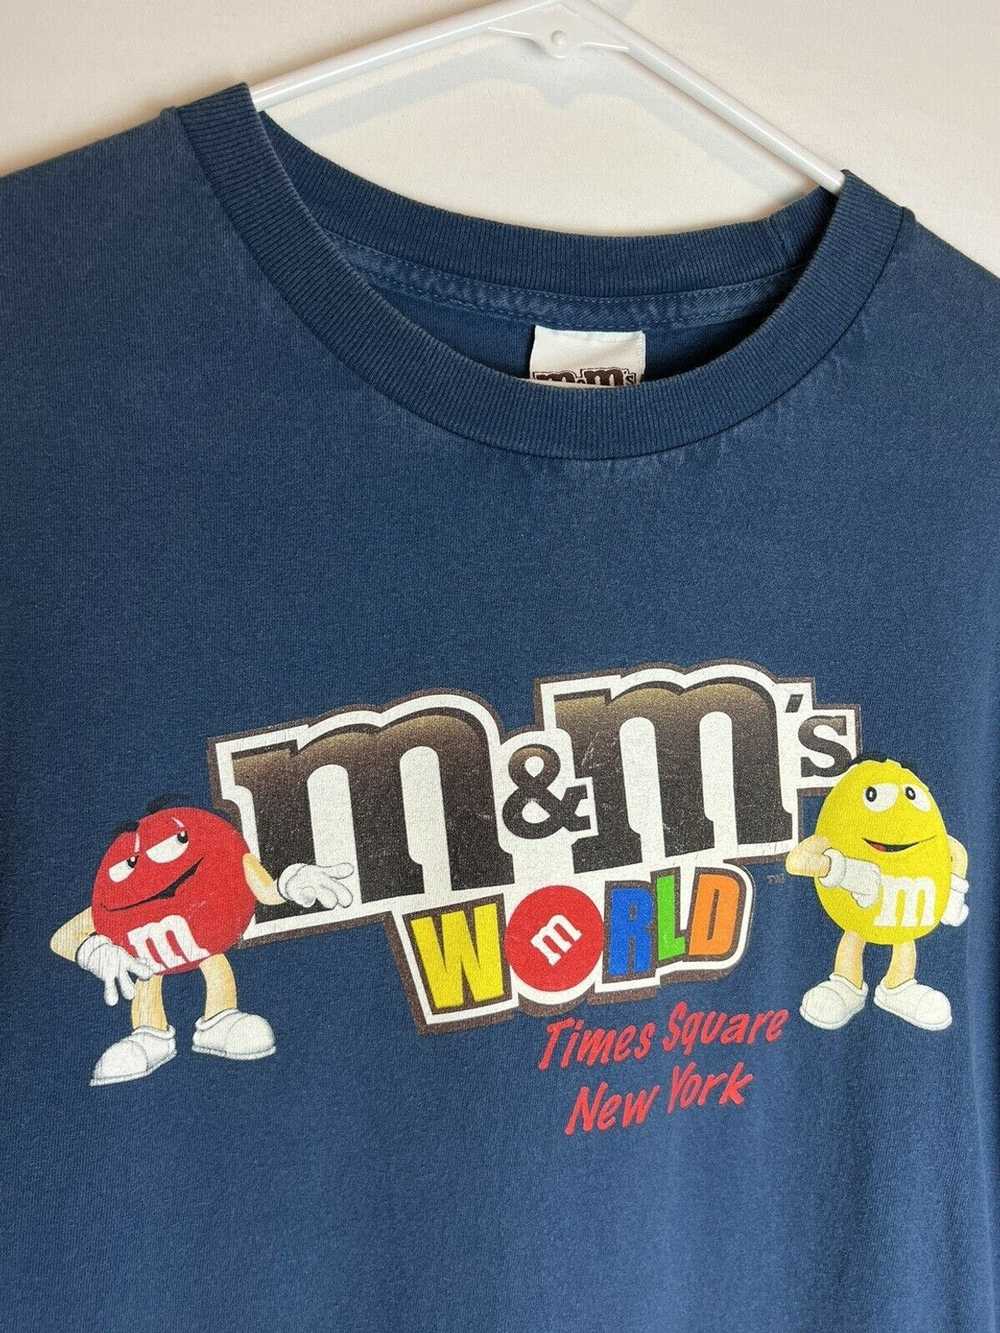 Other M&Ms World Times Square NY Chocolate Candy … - image 4